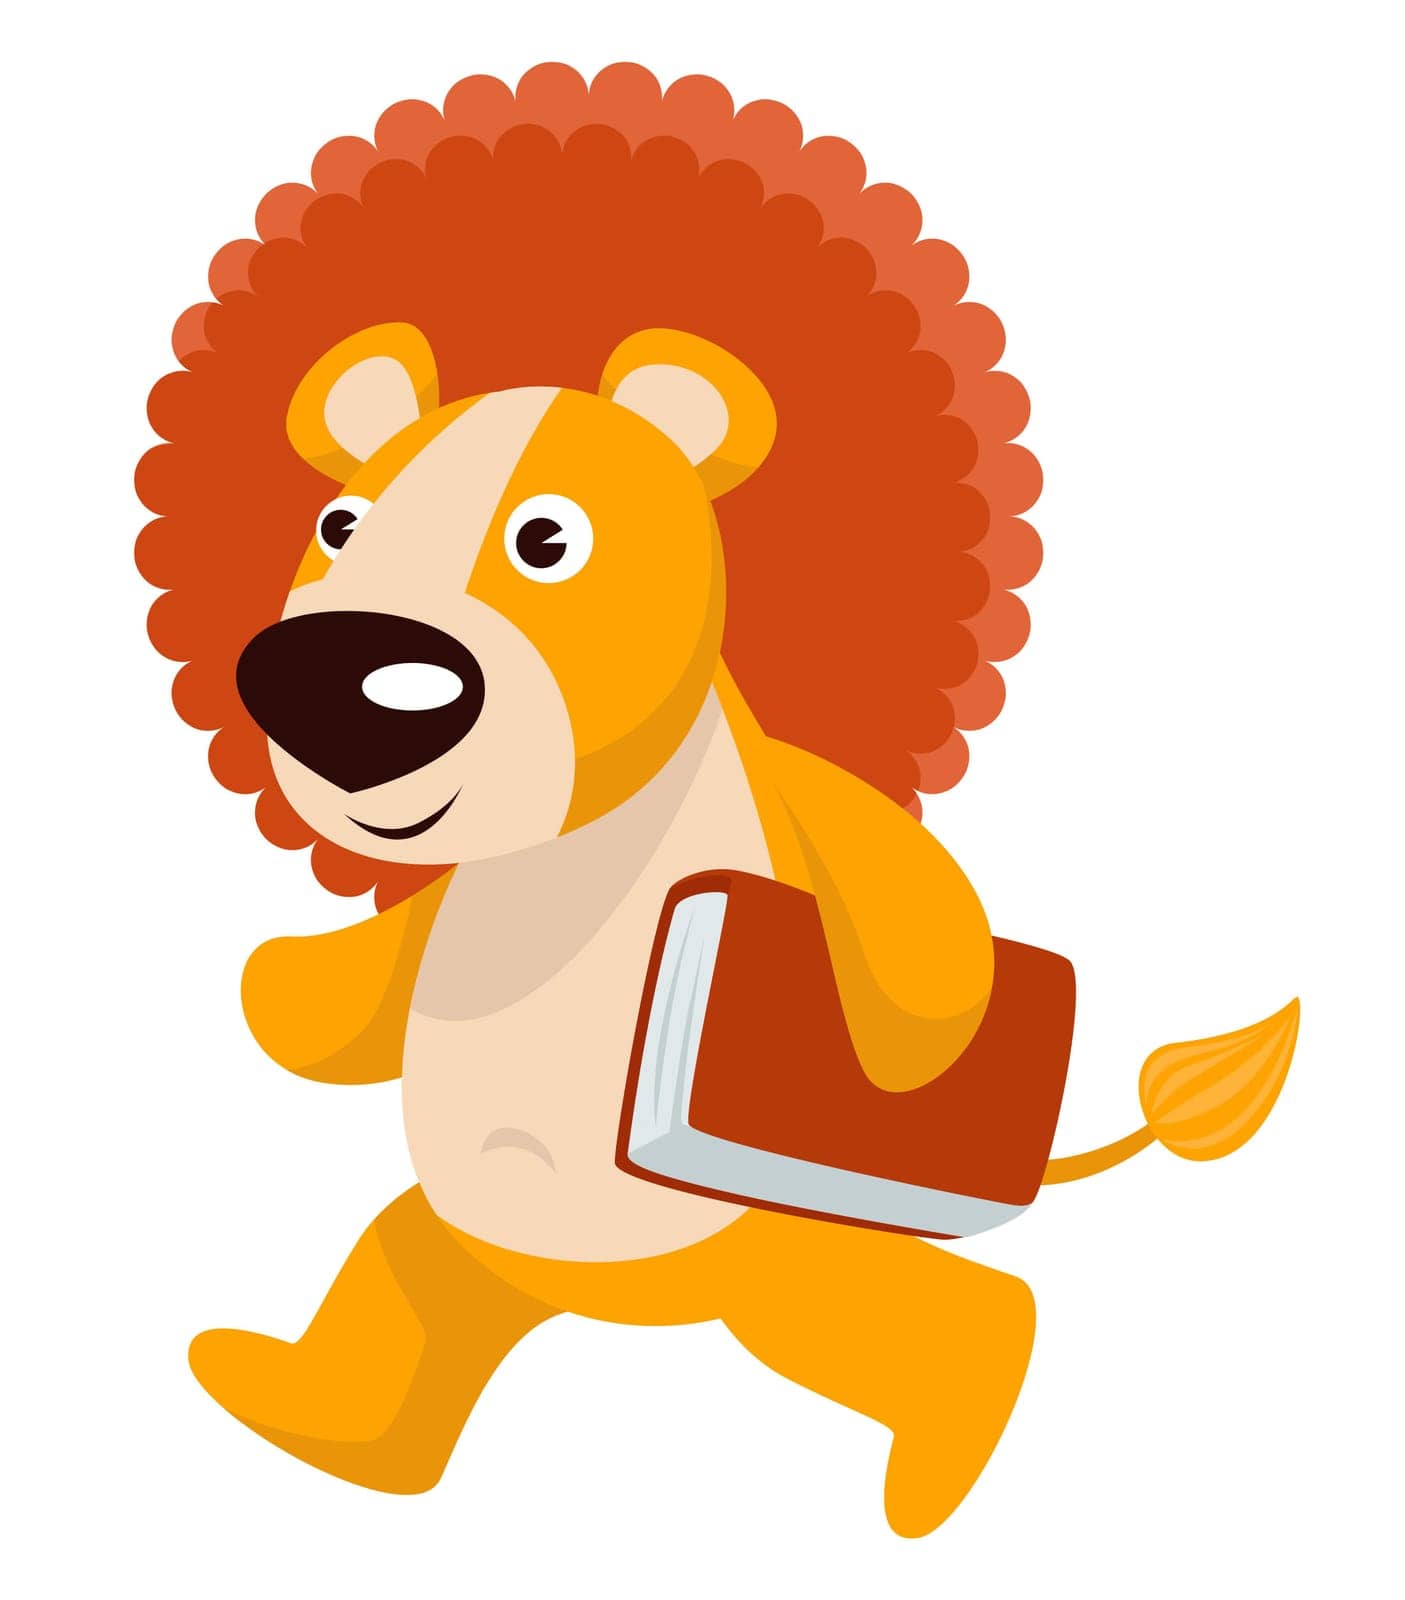 Small clever lion carrying book, isolated animal character walking to school. Studying and education, knowledge obtaining and learning subjects. Literature and disciplines, vector in flat style